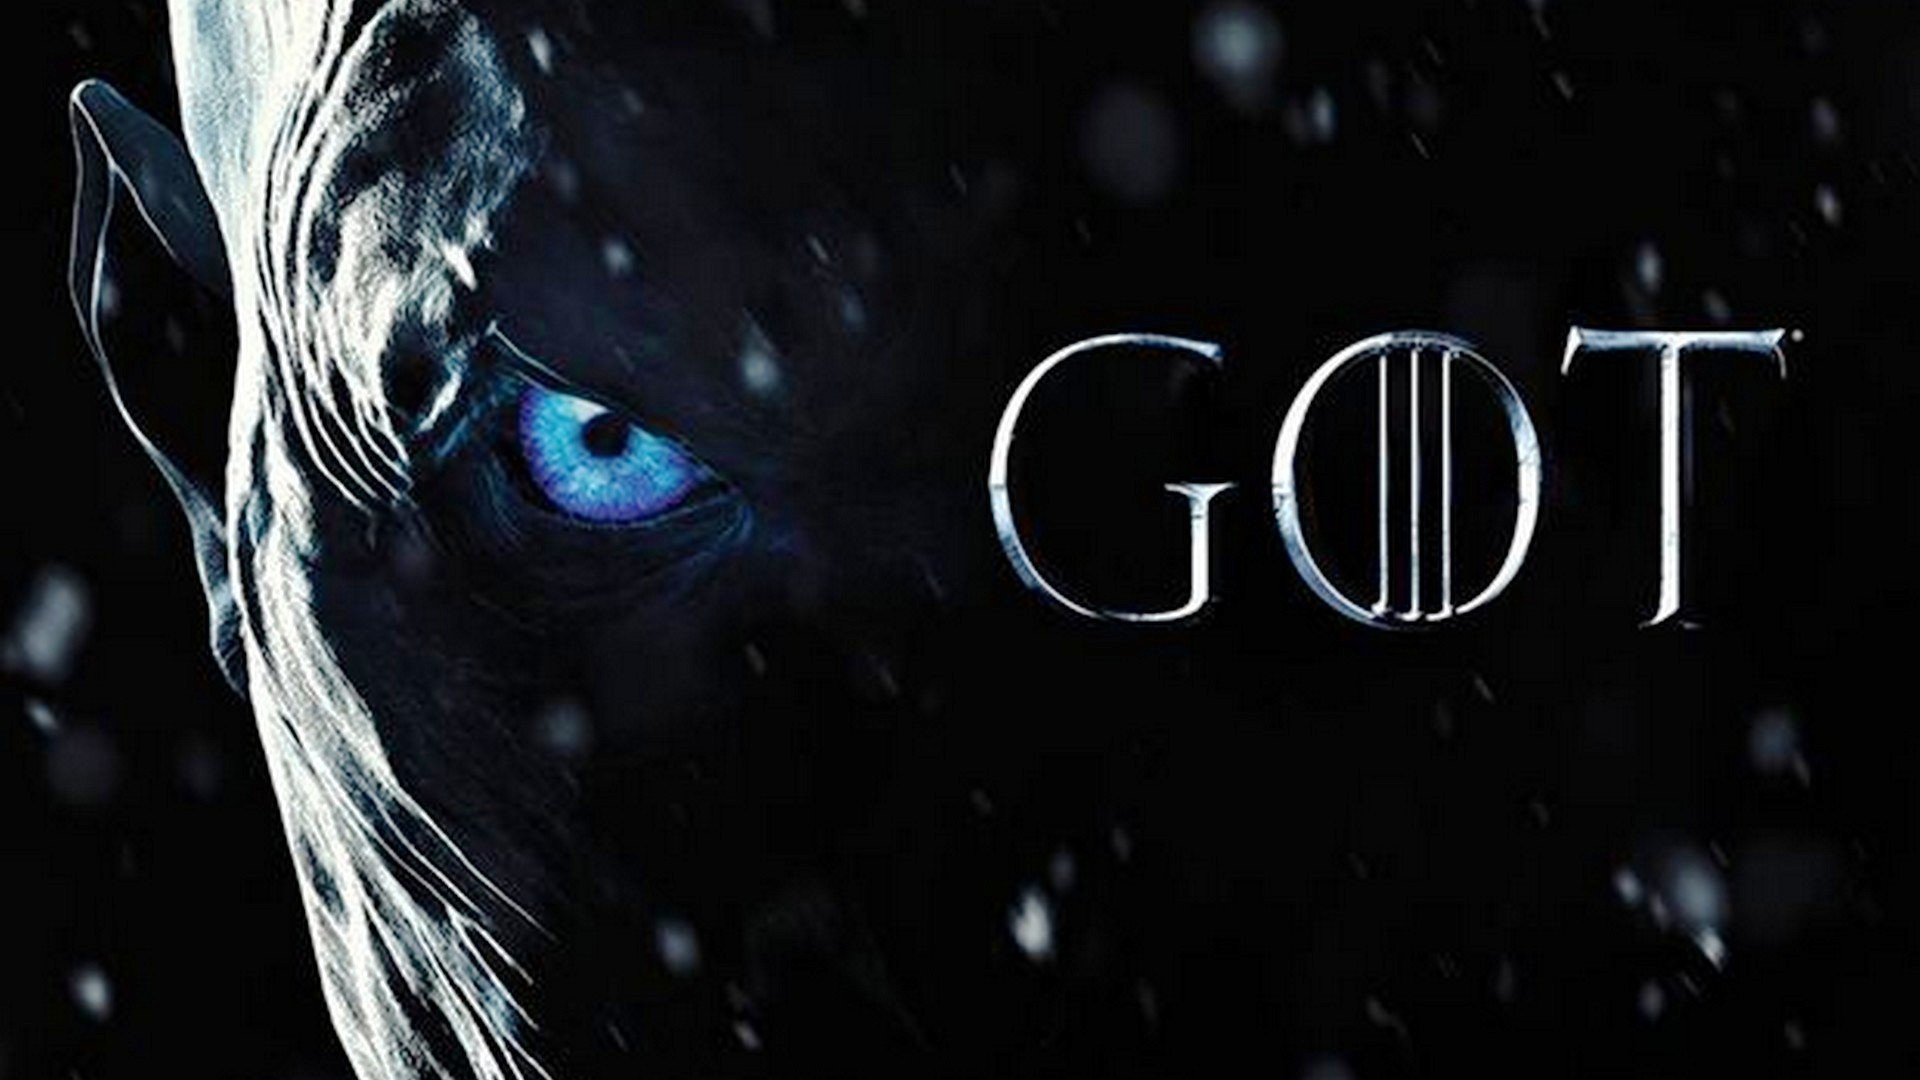 HD Game of Thrones Wallpaper with high-resolution 1920x1080 pixel. You can use this poster wallpaper for your Desktop Computers, Mac Screensavers, Windows Backgrounds, iPhone Wallpapers, Tablet or Android Lock screen and another Mobile device